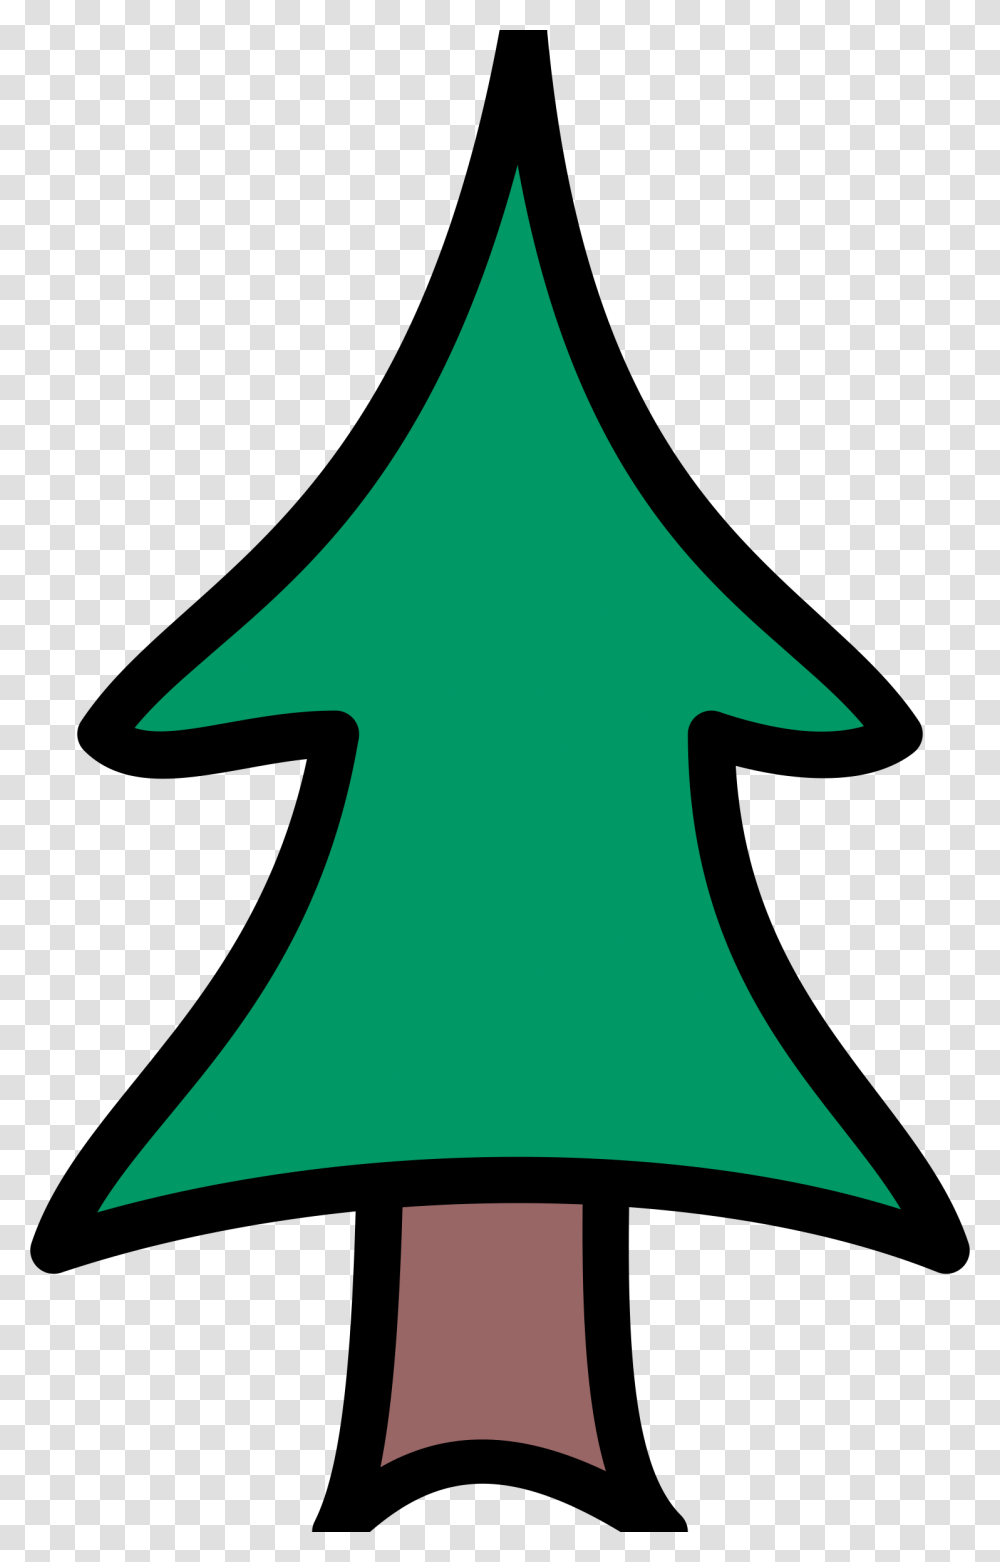 Cartoon Conifer Tree Pine Tree Drawing Vector Clipart Image, Green, Star Symbol, Recycling Symbol Transparent Png